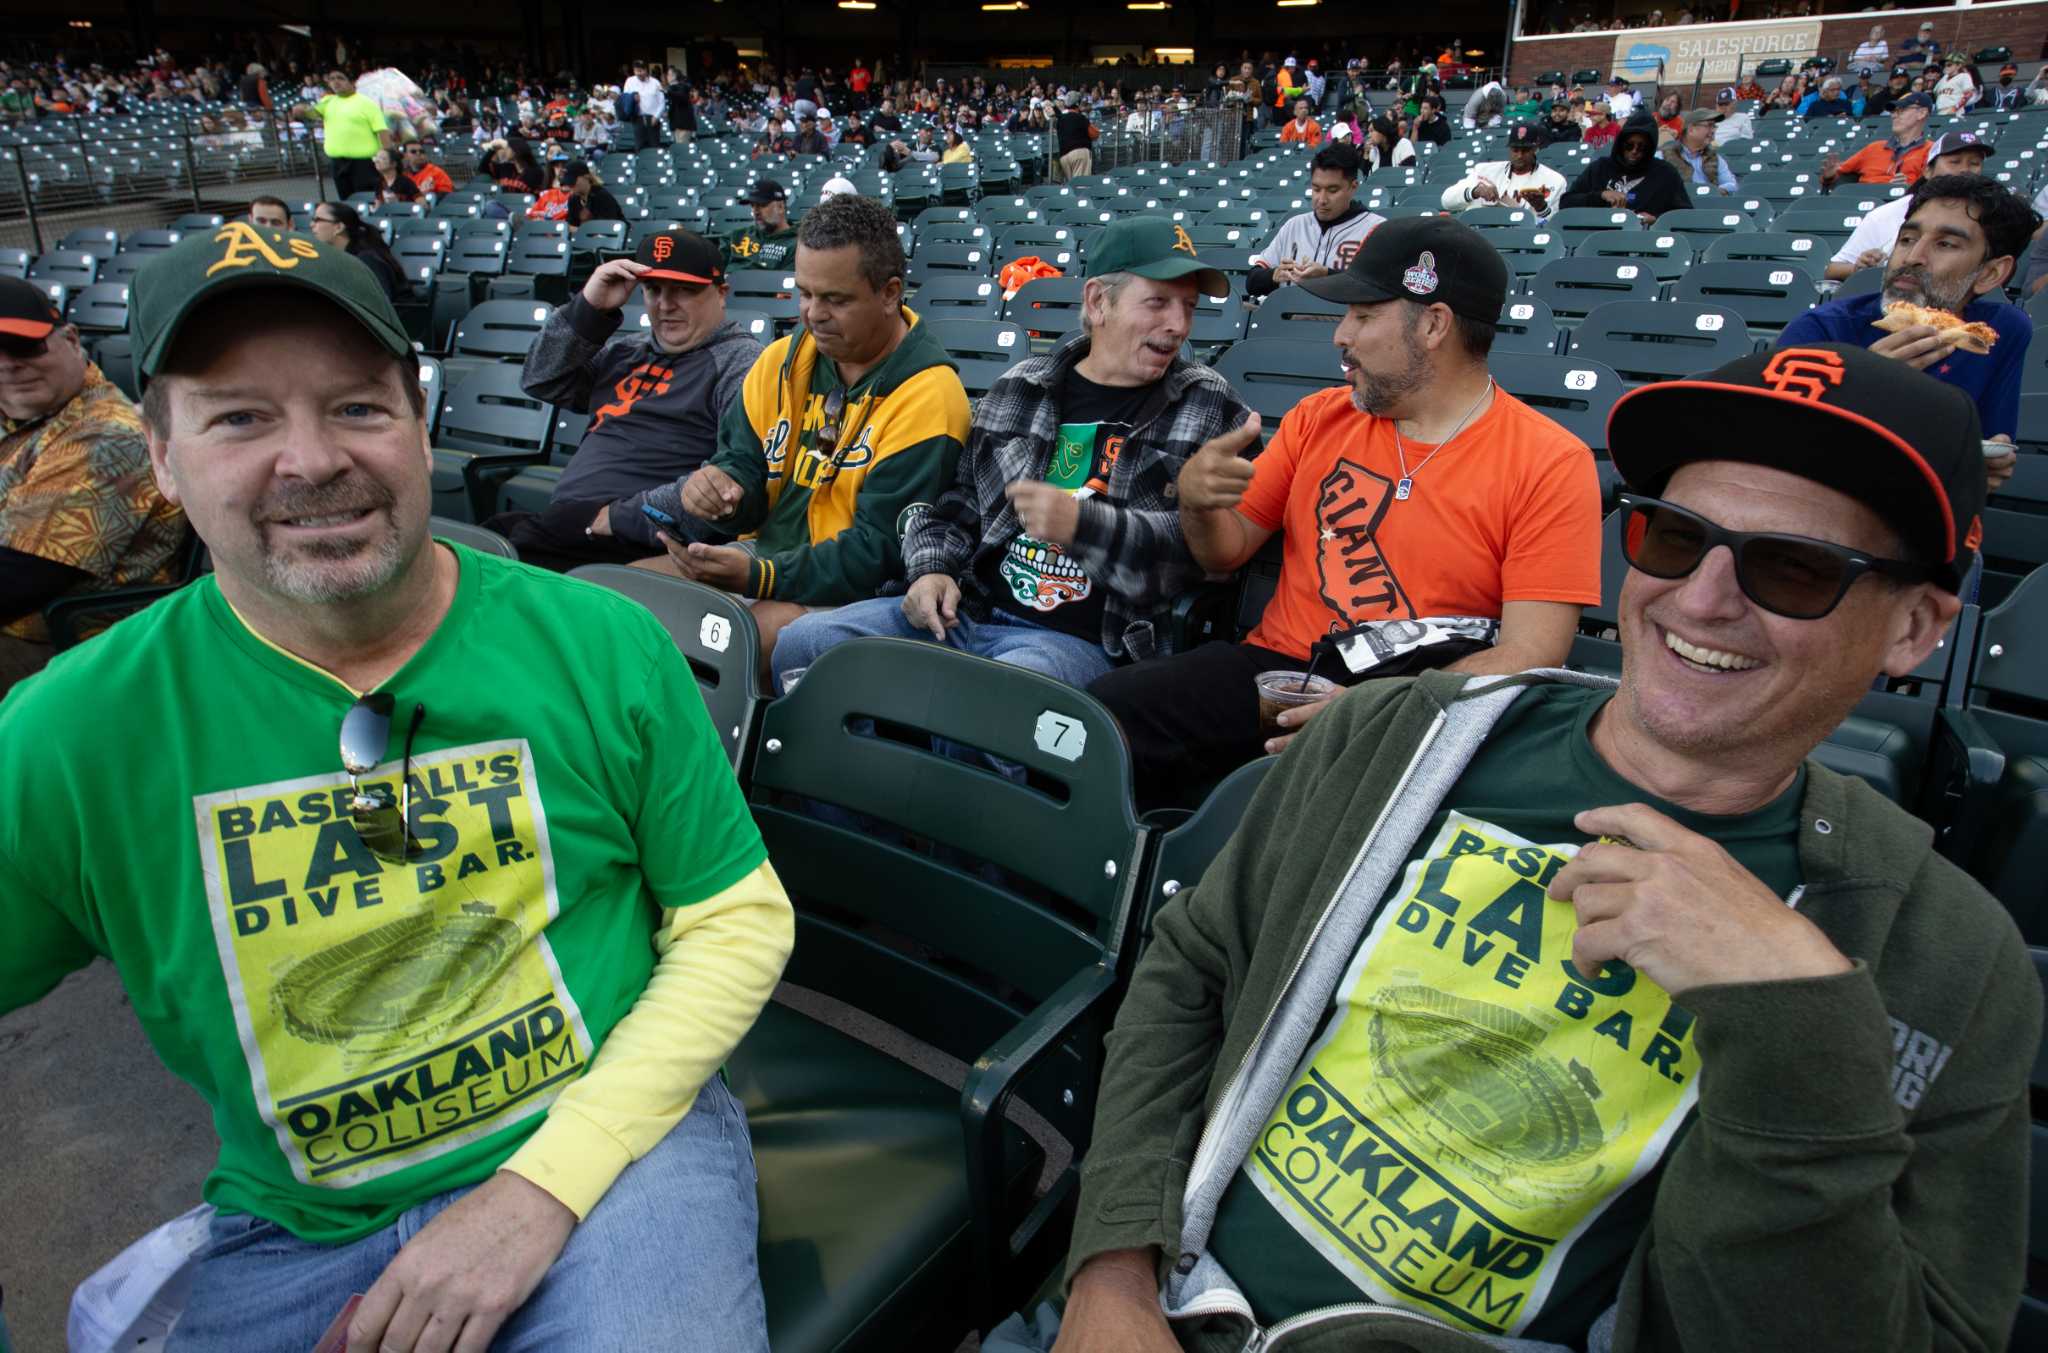 The best chance for A's fans to make a big point is with tiny crowds